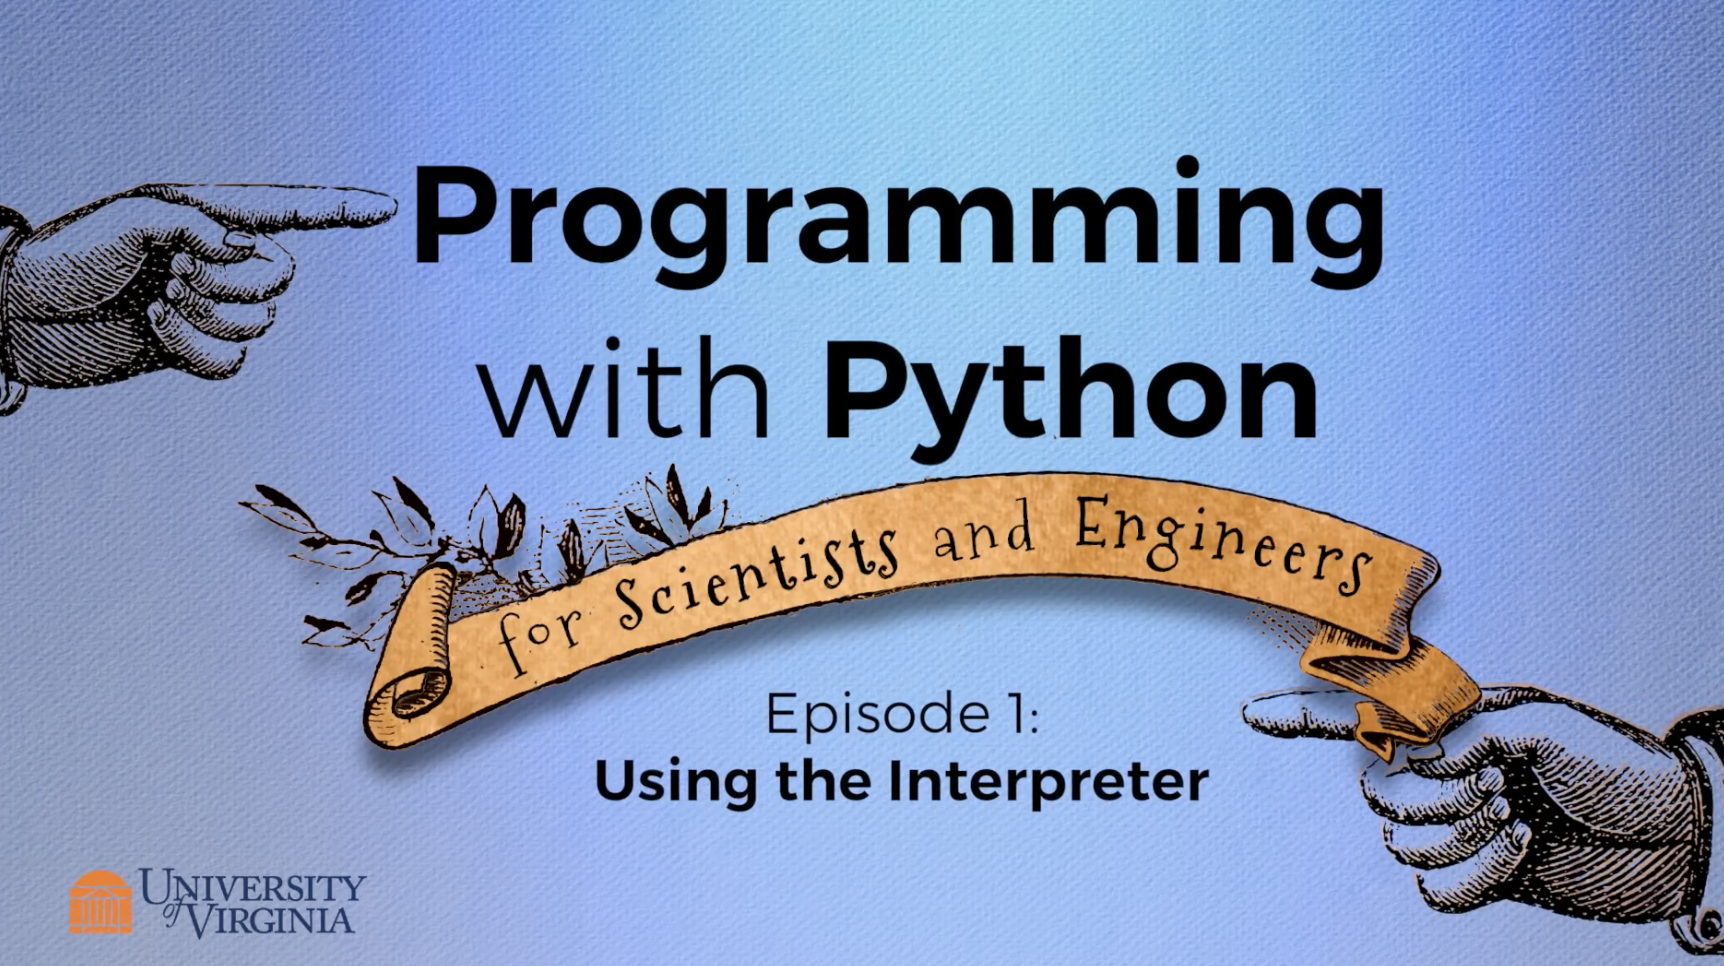 Programming with Python for Scientists and Engineers image